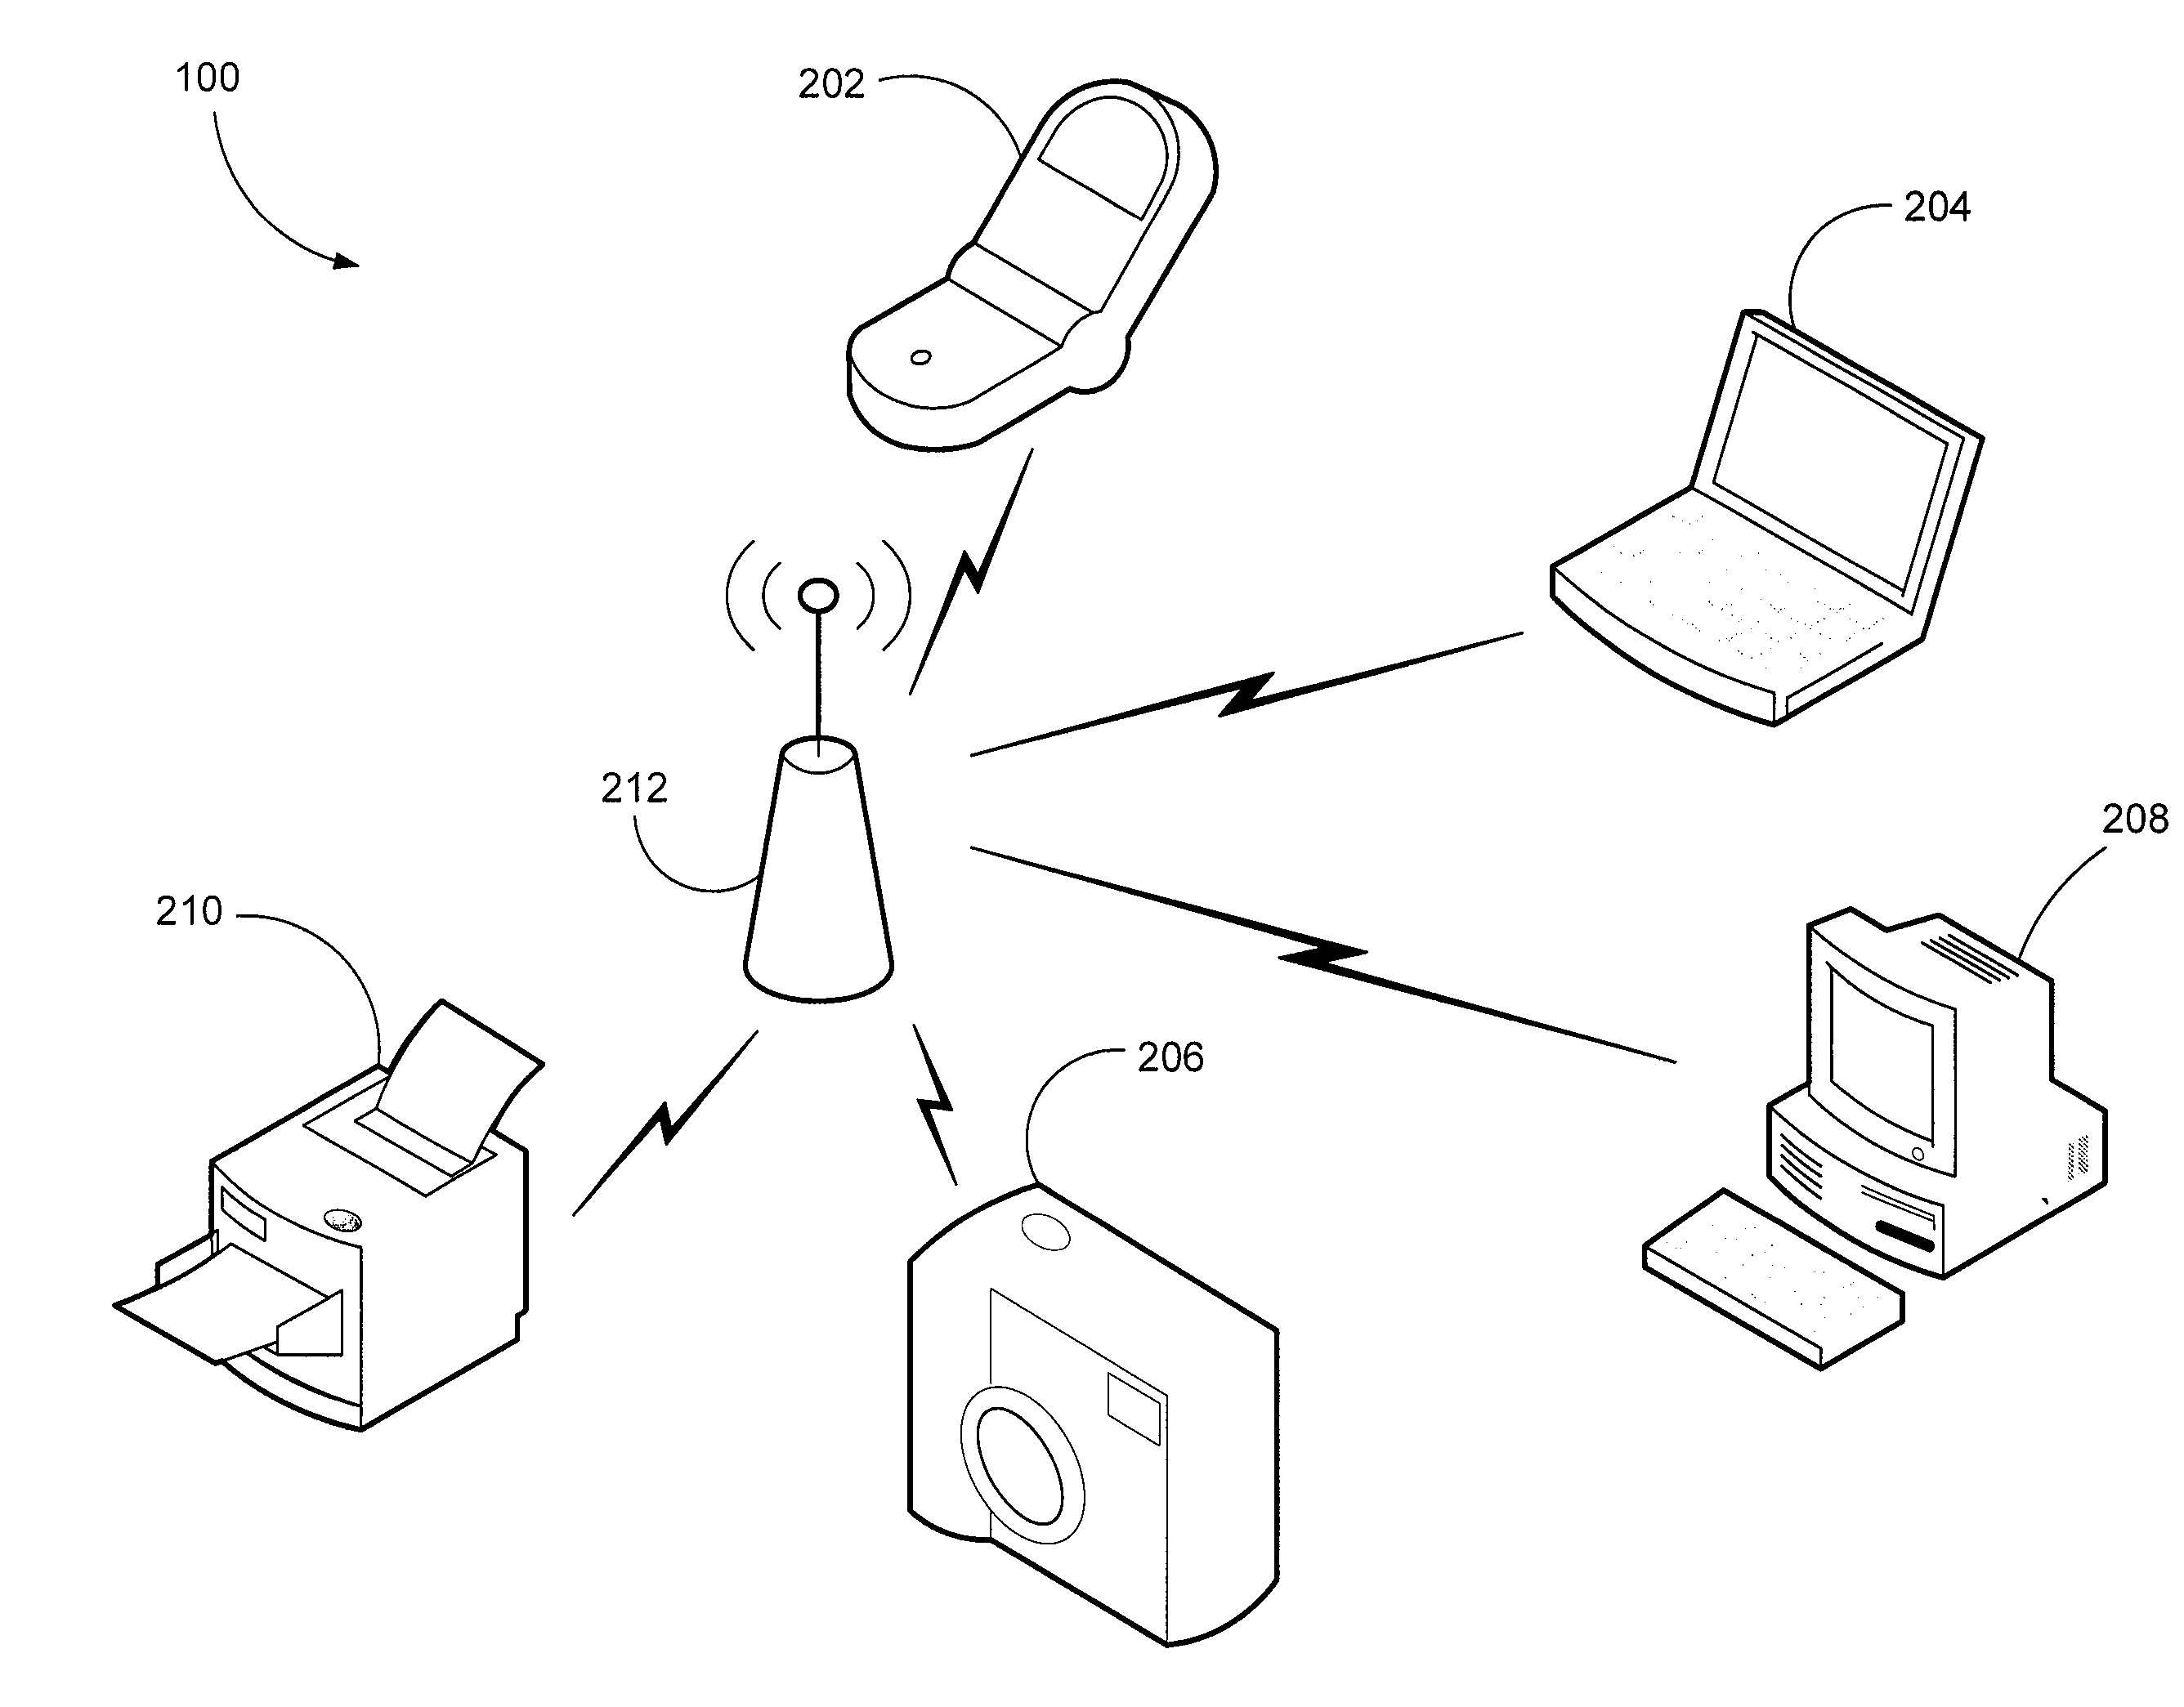 Sleep Mode Systems and Methods